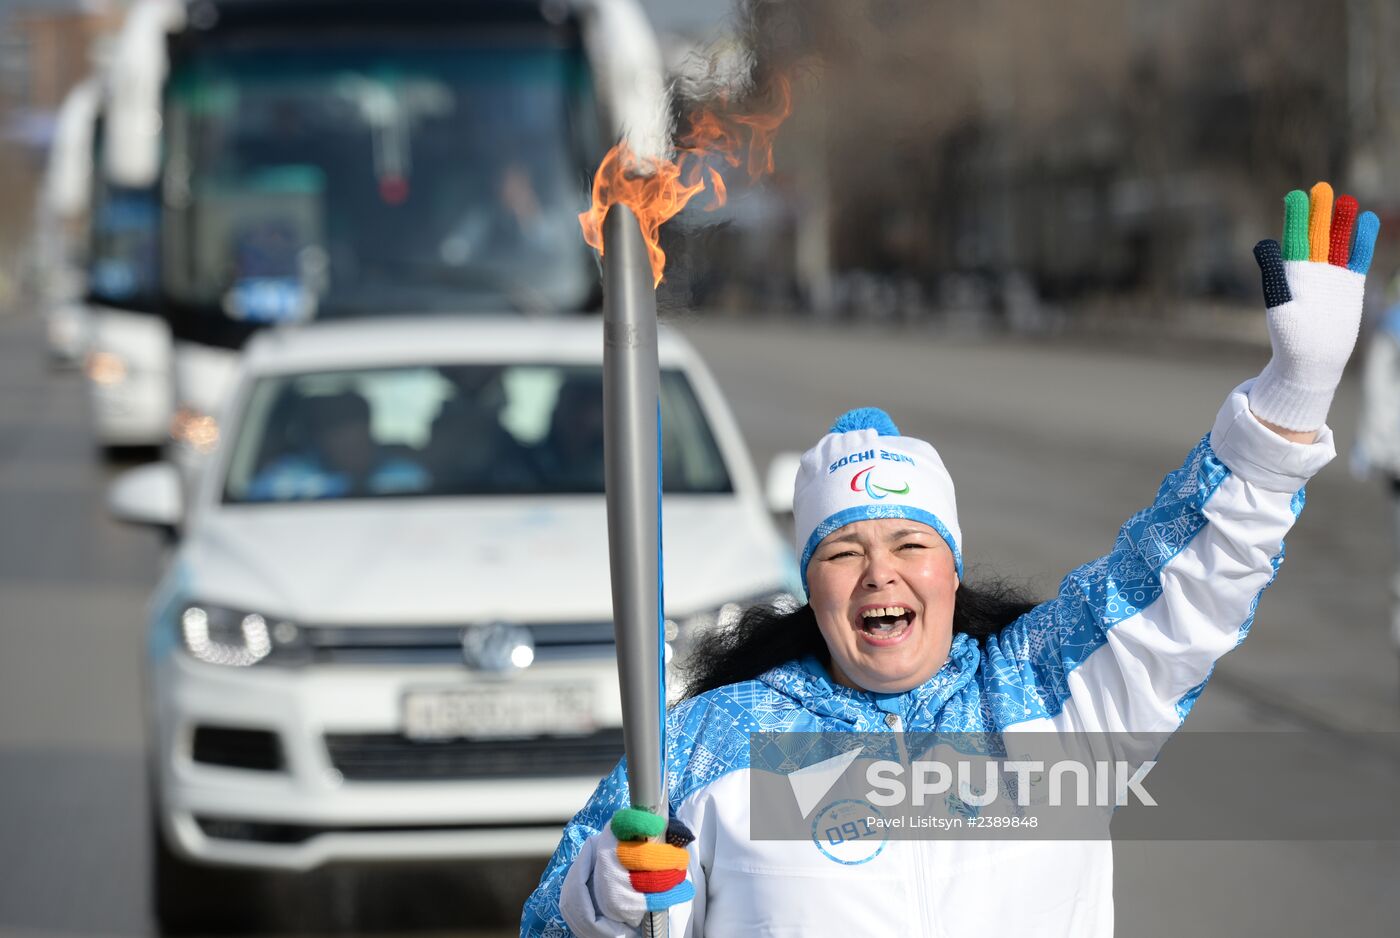 Paralympic torch relay. Yekaterinburg